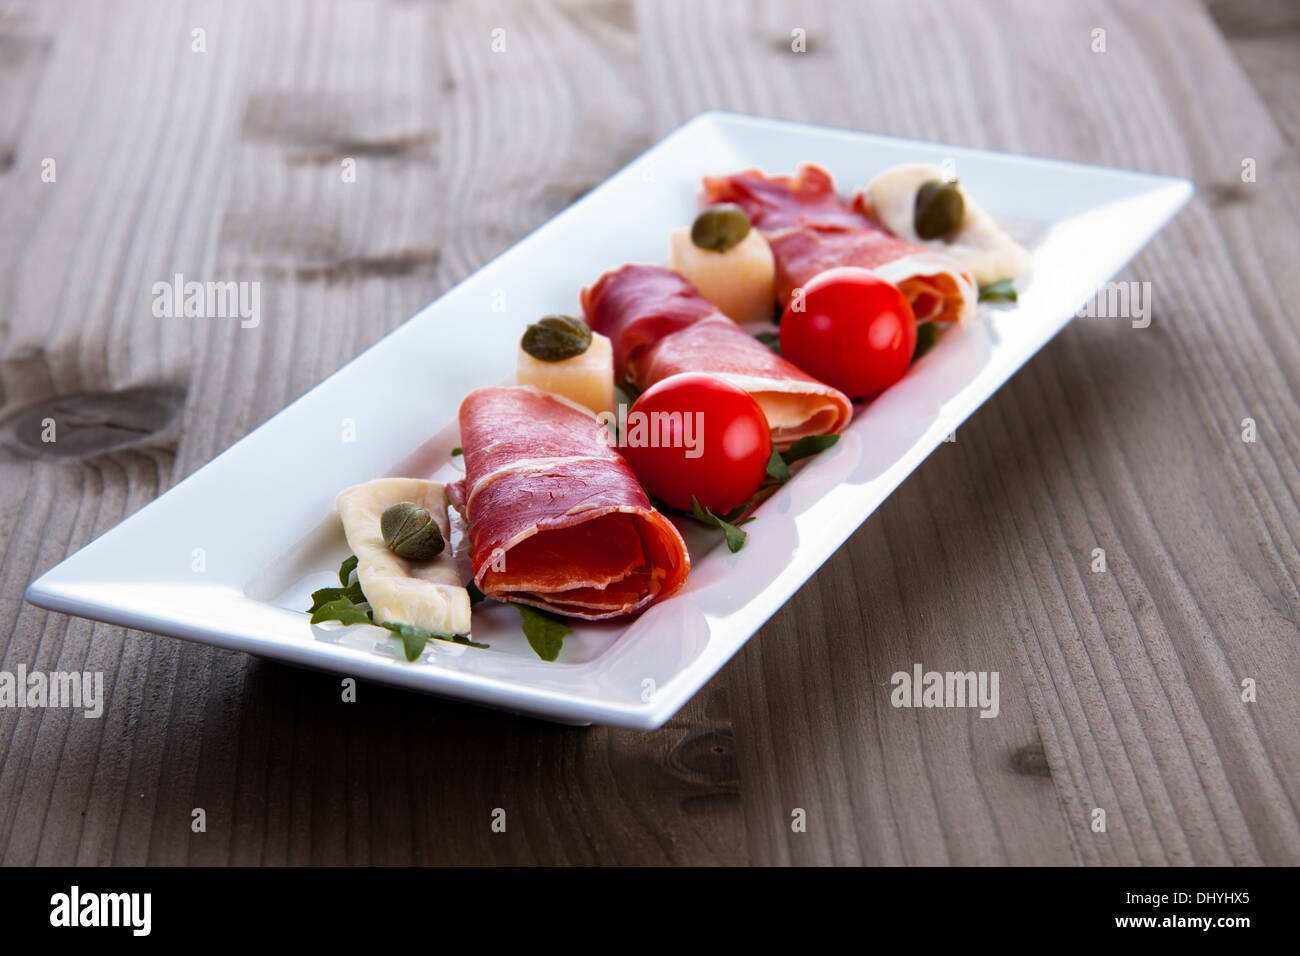 Slices of Delicious Prosciutto with capers, olives and cheese Stock Photo